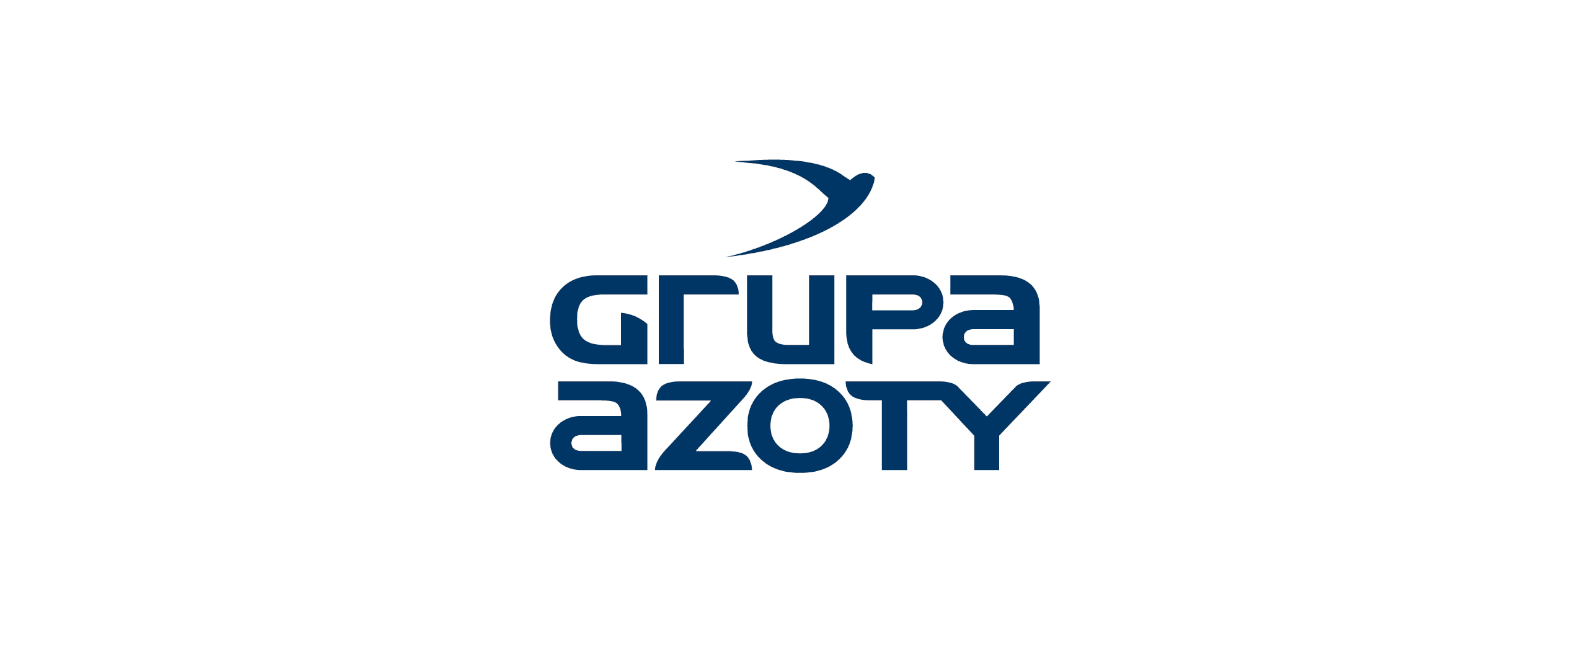 Grupa Azoty S.A. temporarily shuts down nitrogen fertilizer, caprolactam and polyamide 6 production units in consequence of record gas prices 